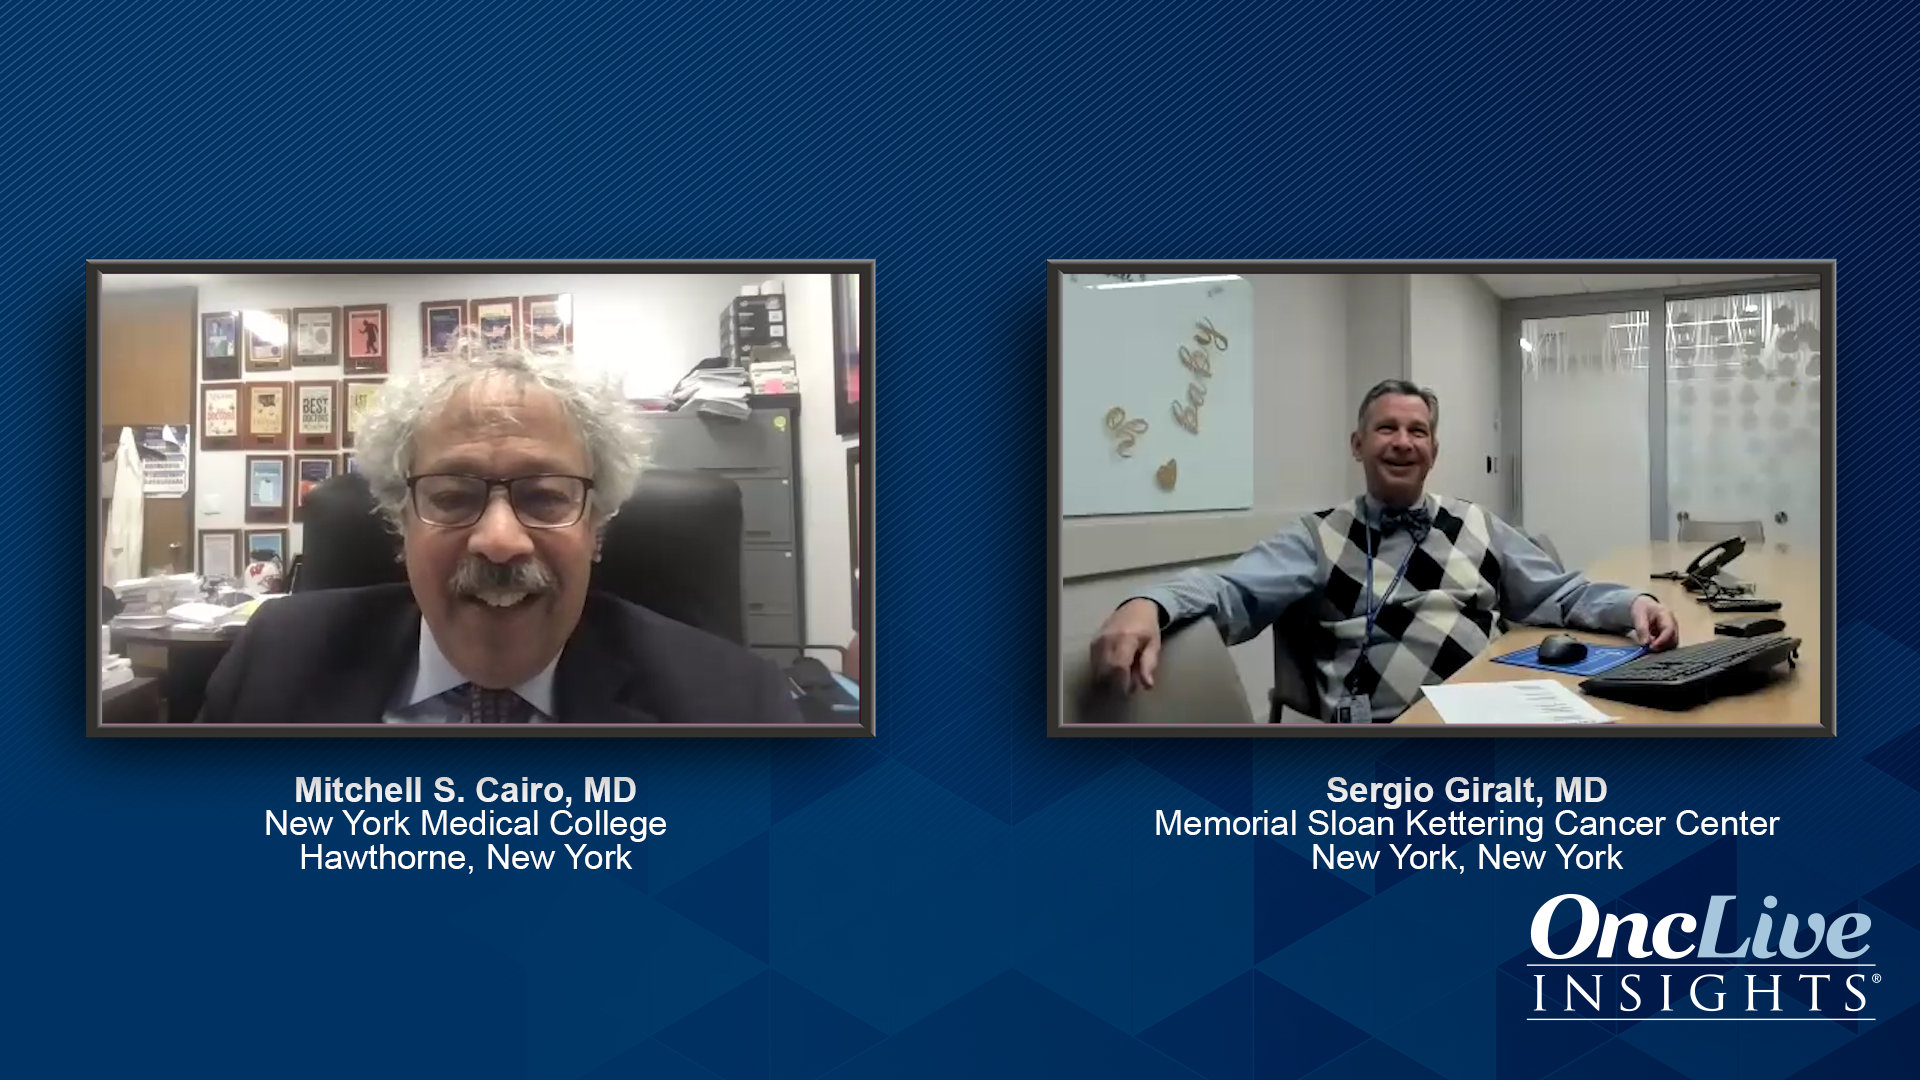 Mitchell S. Cairo, MD, and Sergio Giralt, MD, experts on veno-occlusive disease